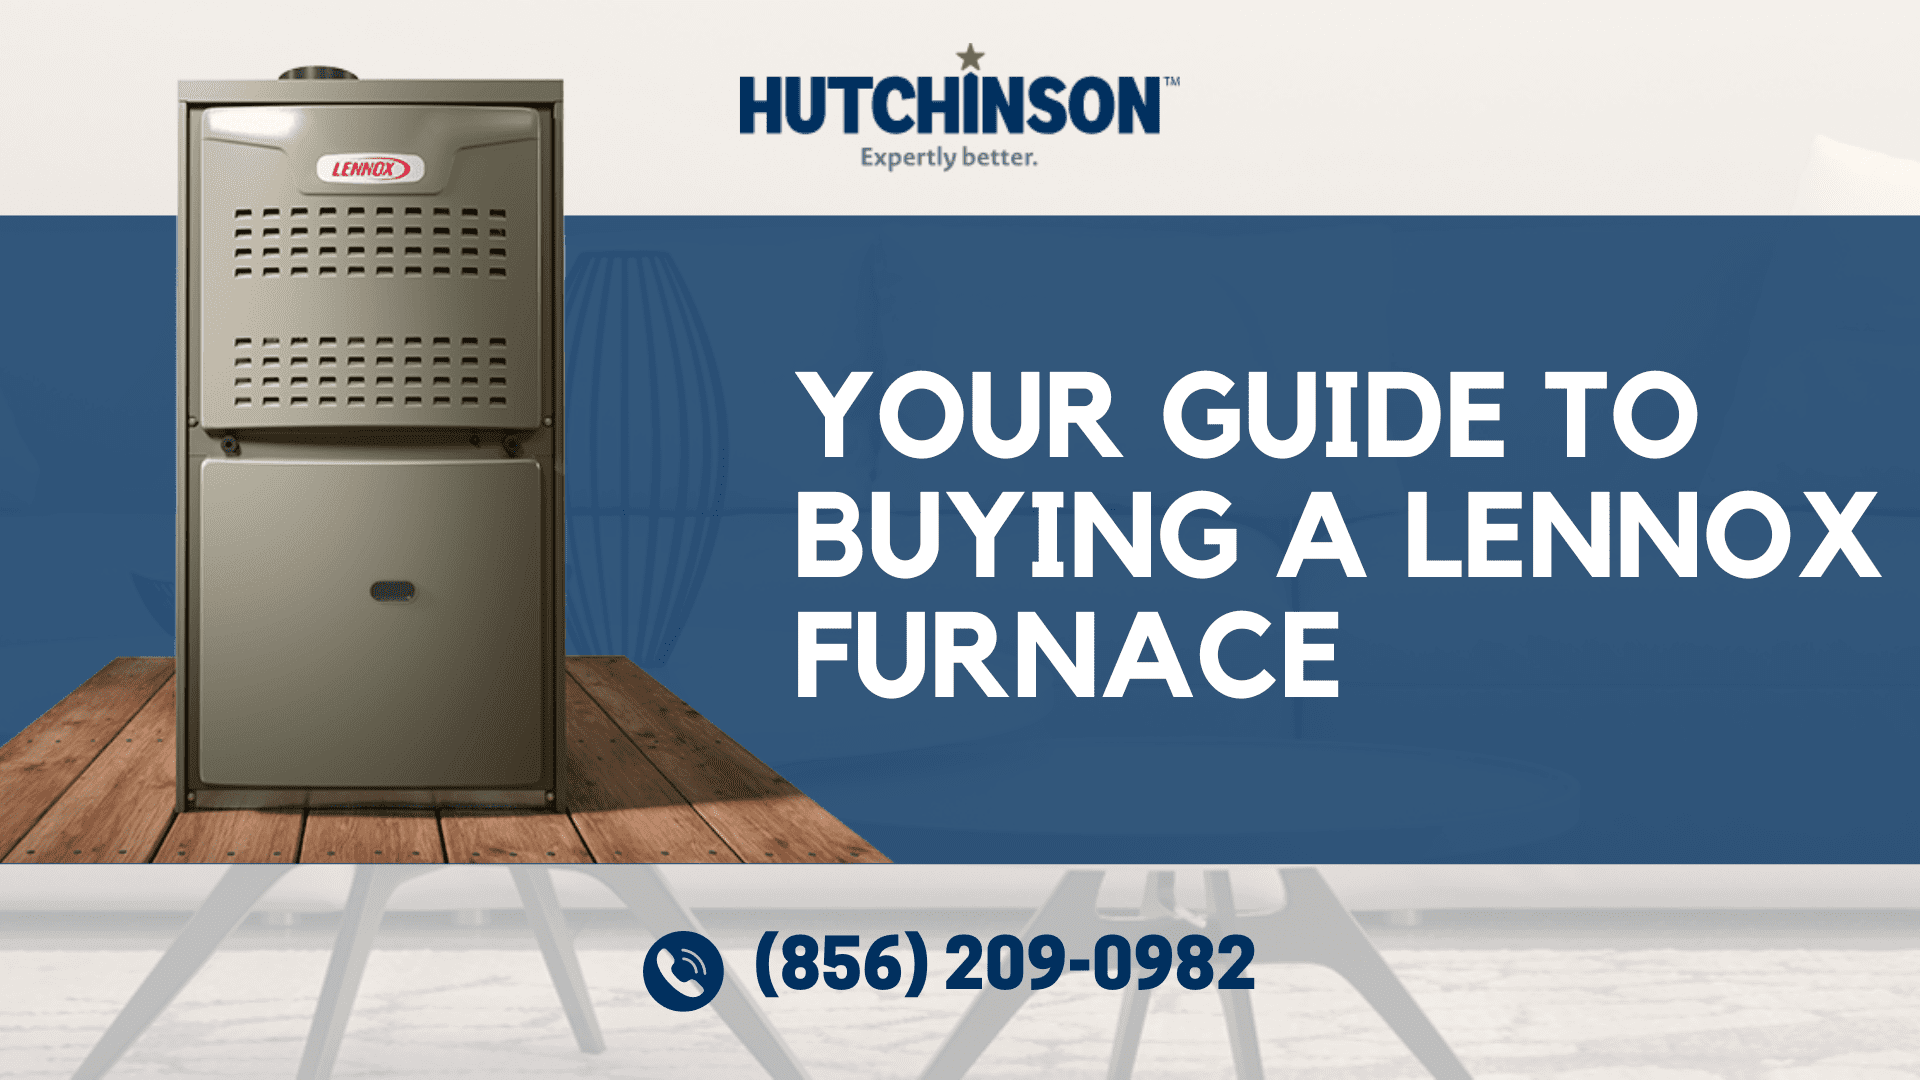 How long does a furnace last in NJ?